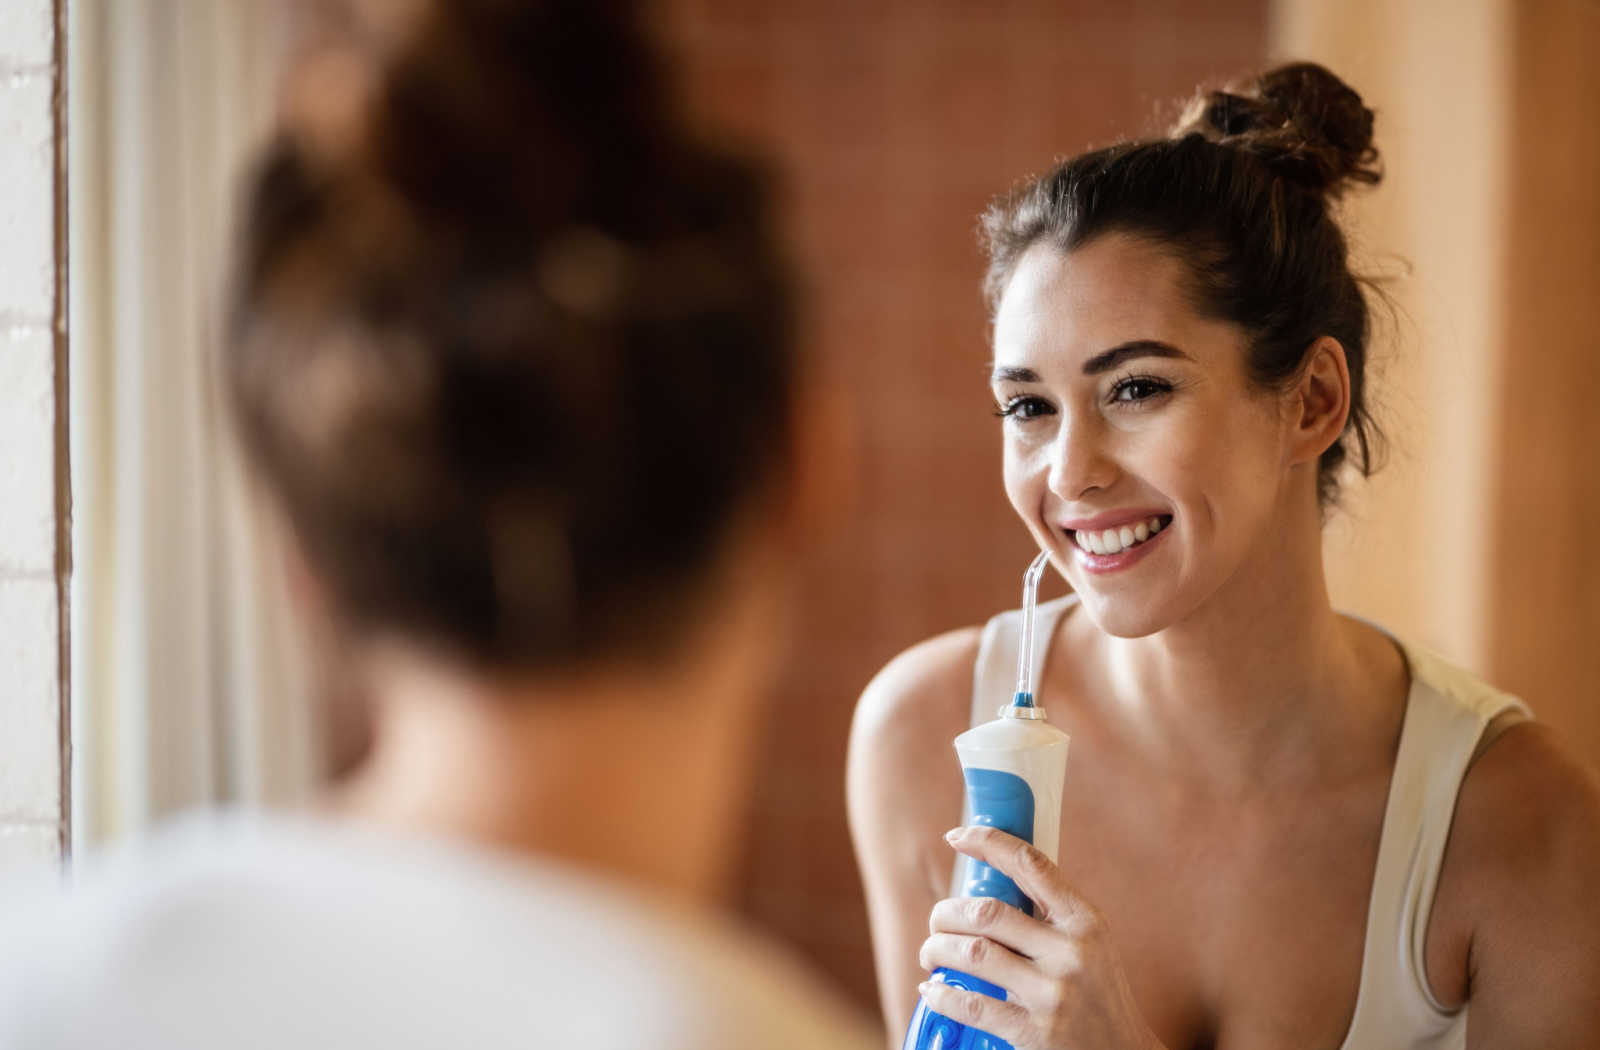 A woman looking in the mirror while using a water flosser to help maintain good oral hygiene.